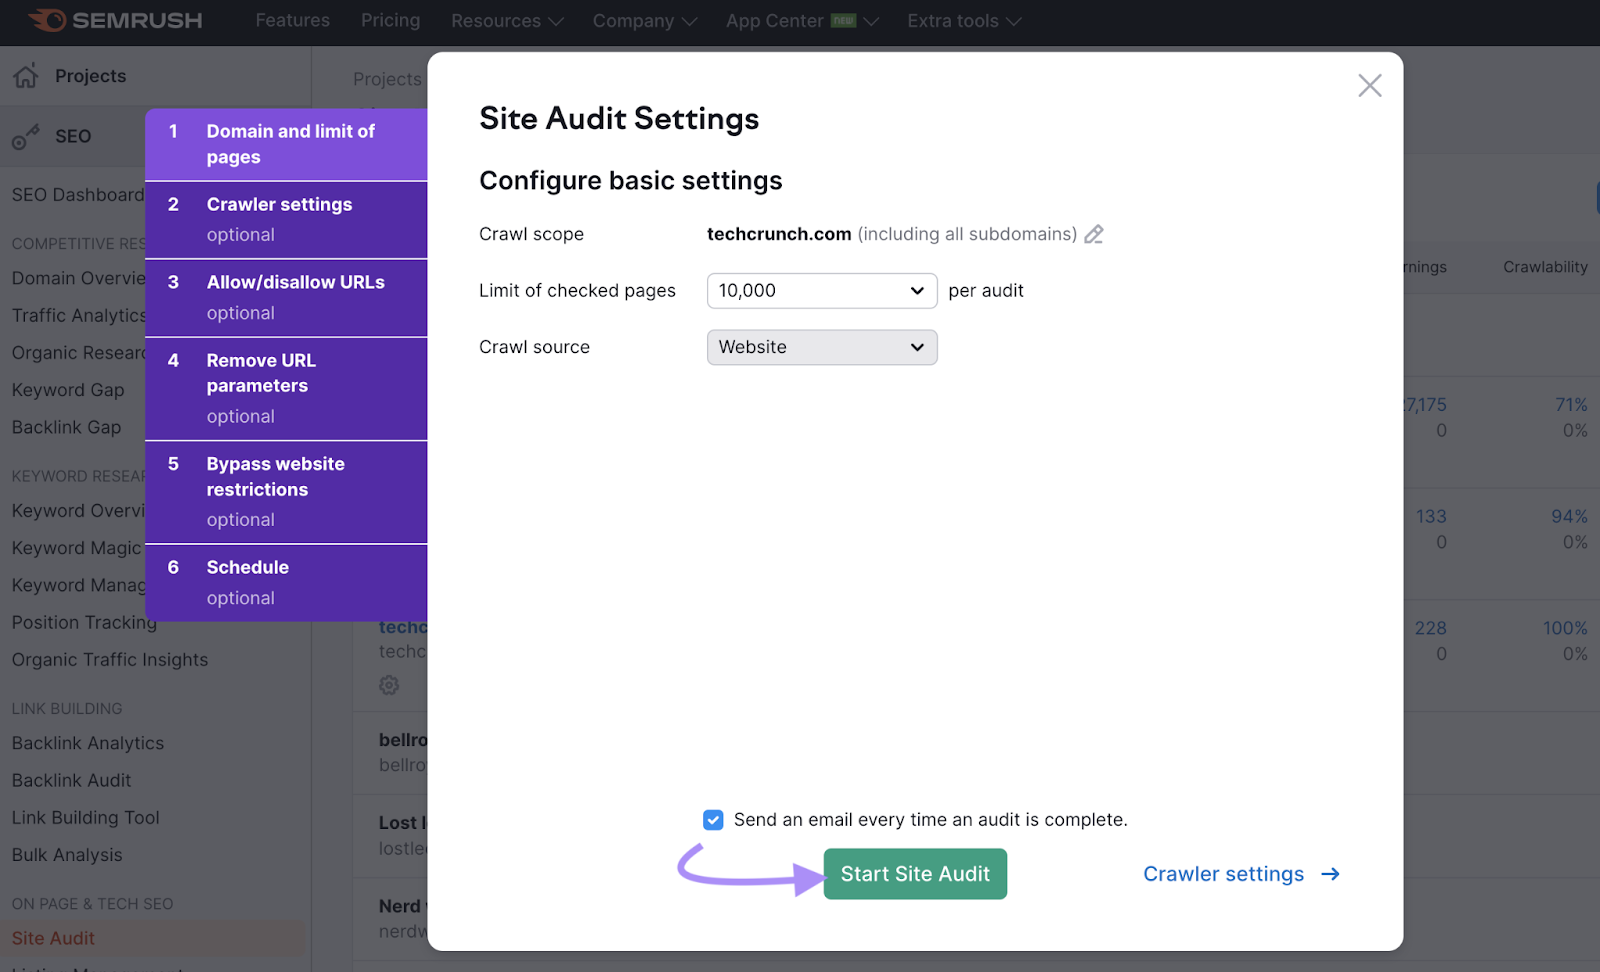 "Site Audit Settings" page